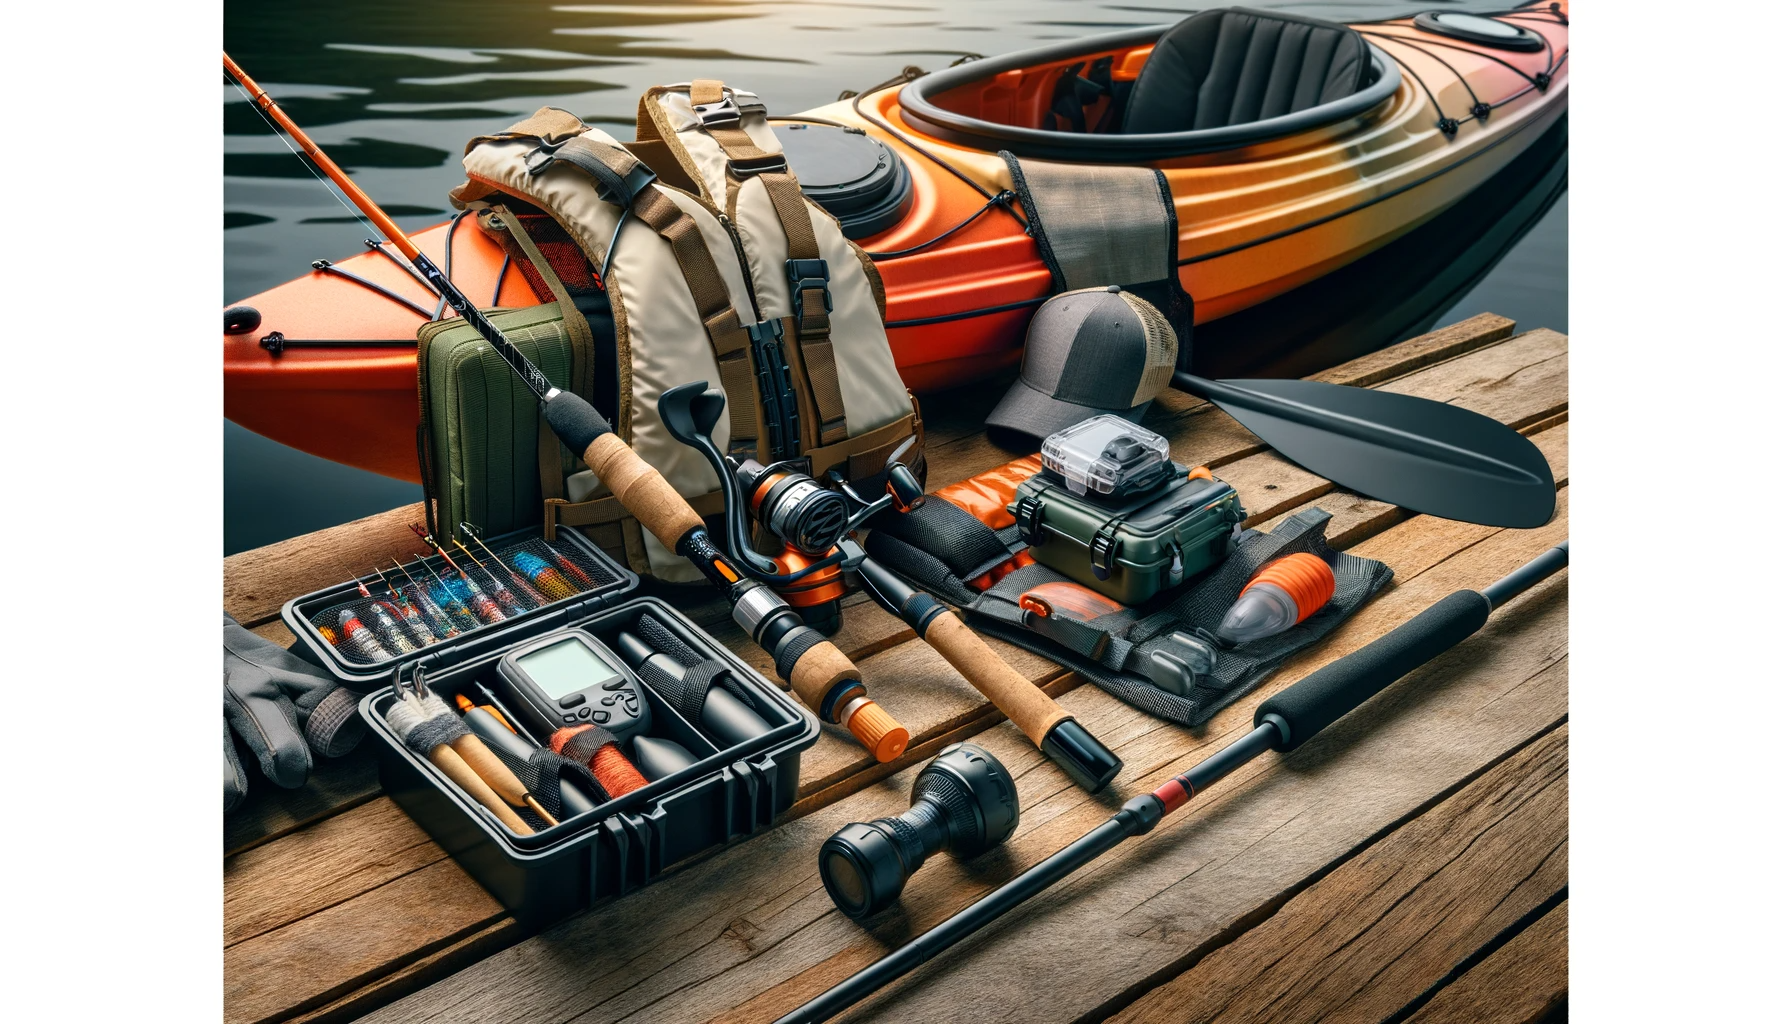 The Beginners Guide to Buying Kayak Dishing Accessories